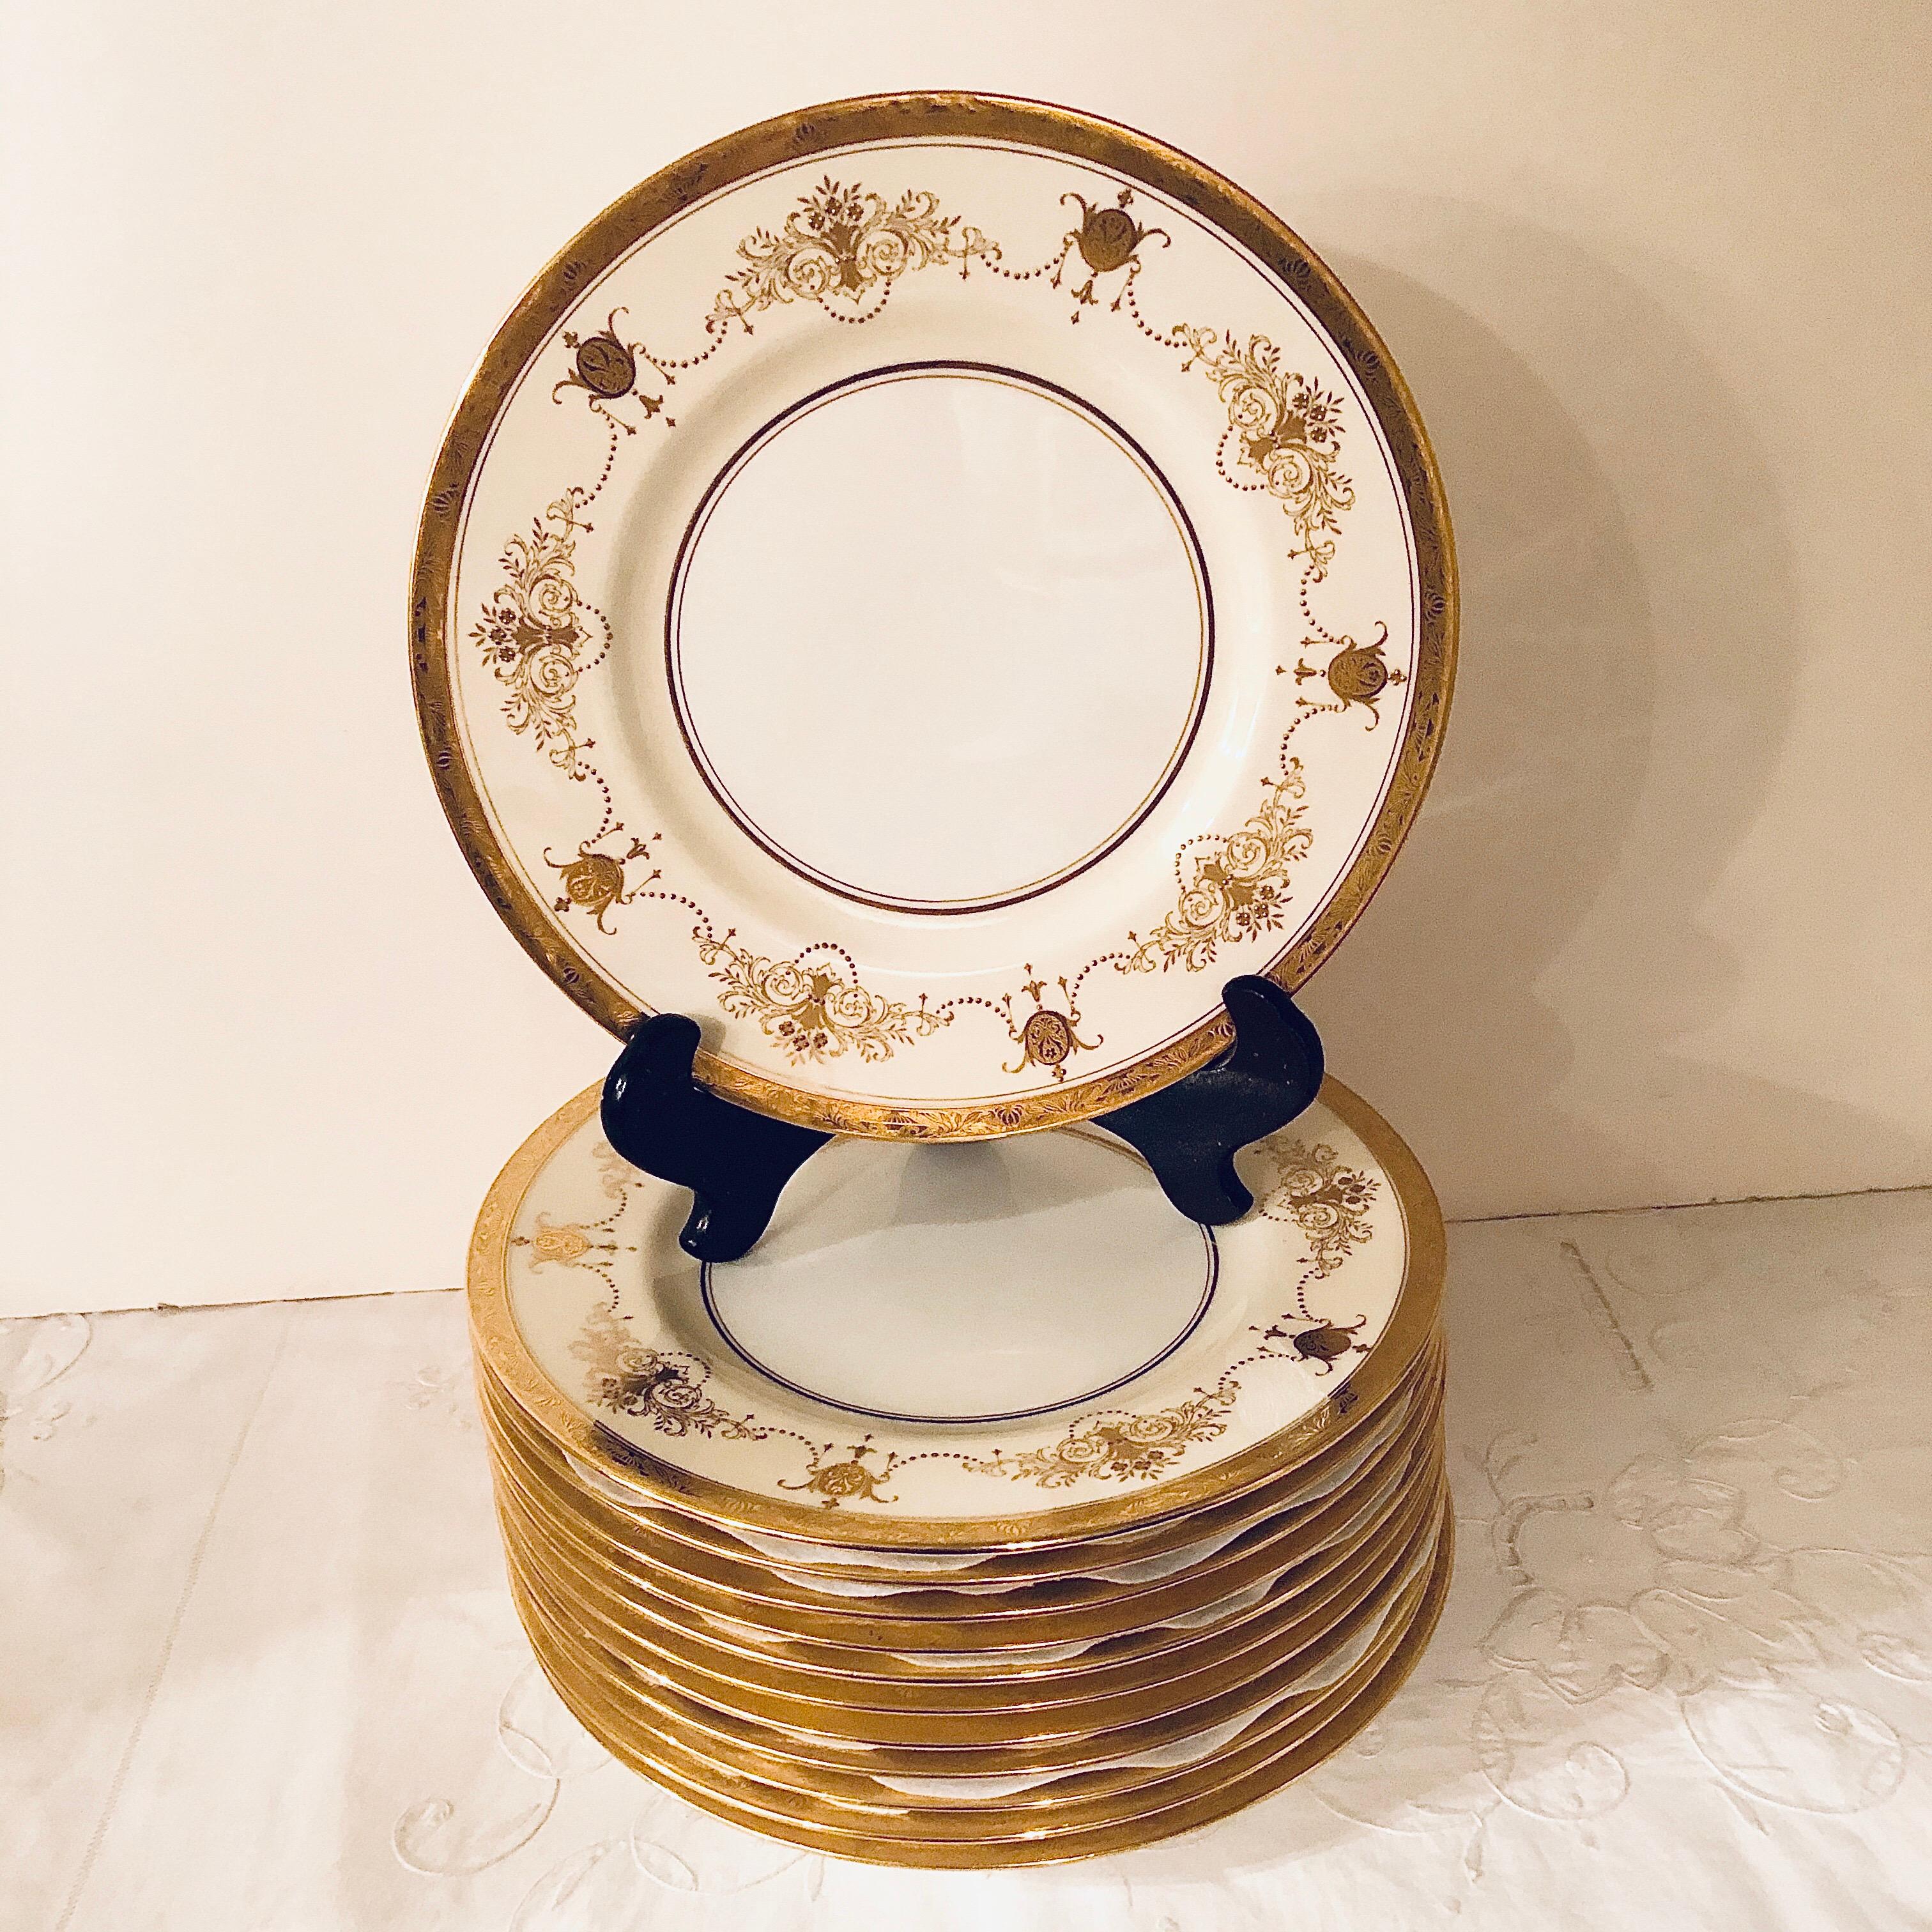 Set of 12 Minton Dinner Plates Decorated with Ribbons of Raised Gilded Jeweling For Sale 4